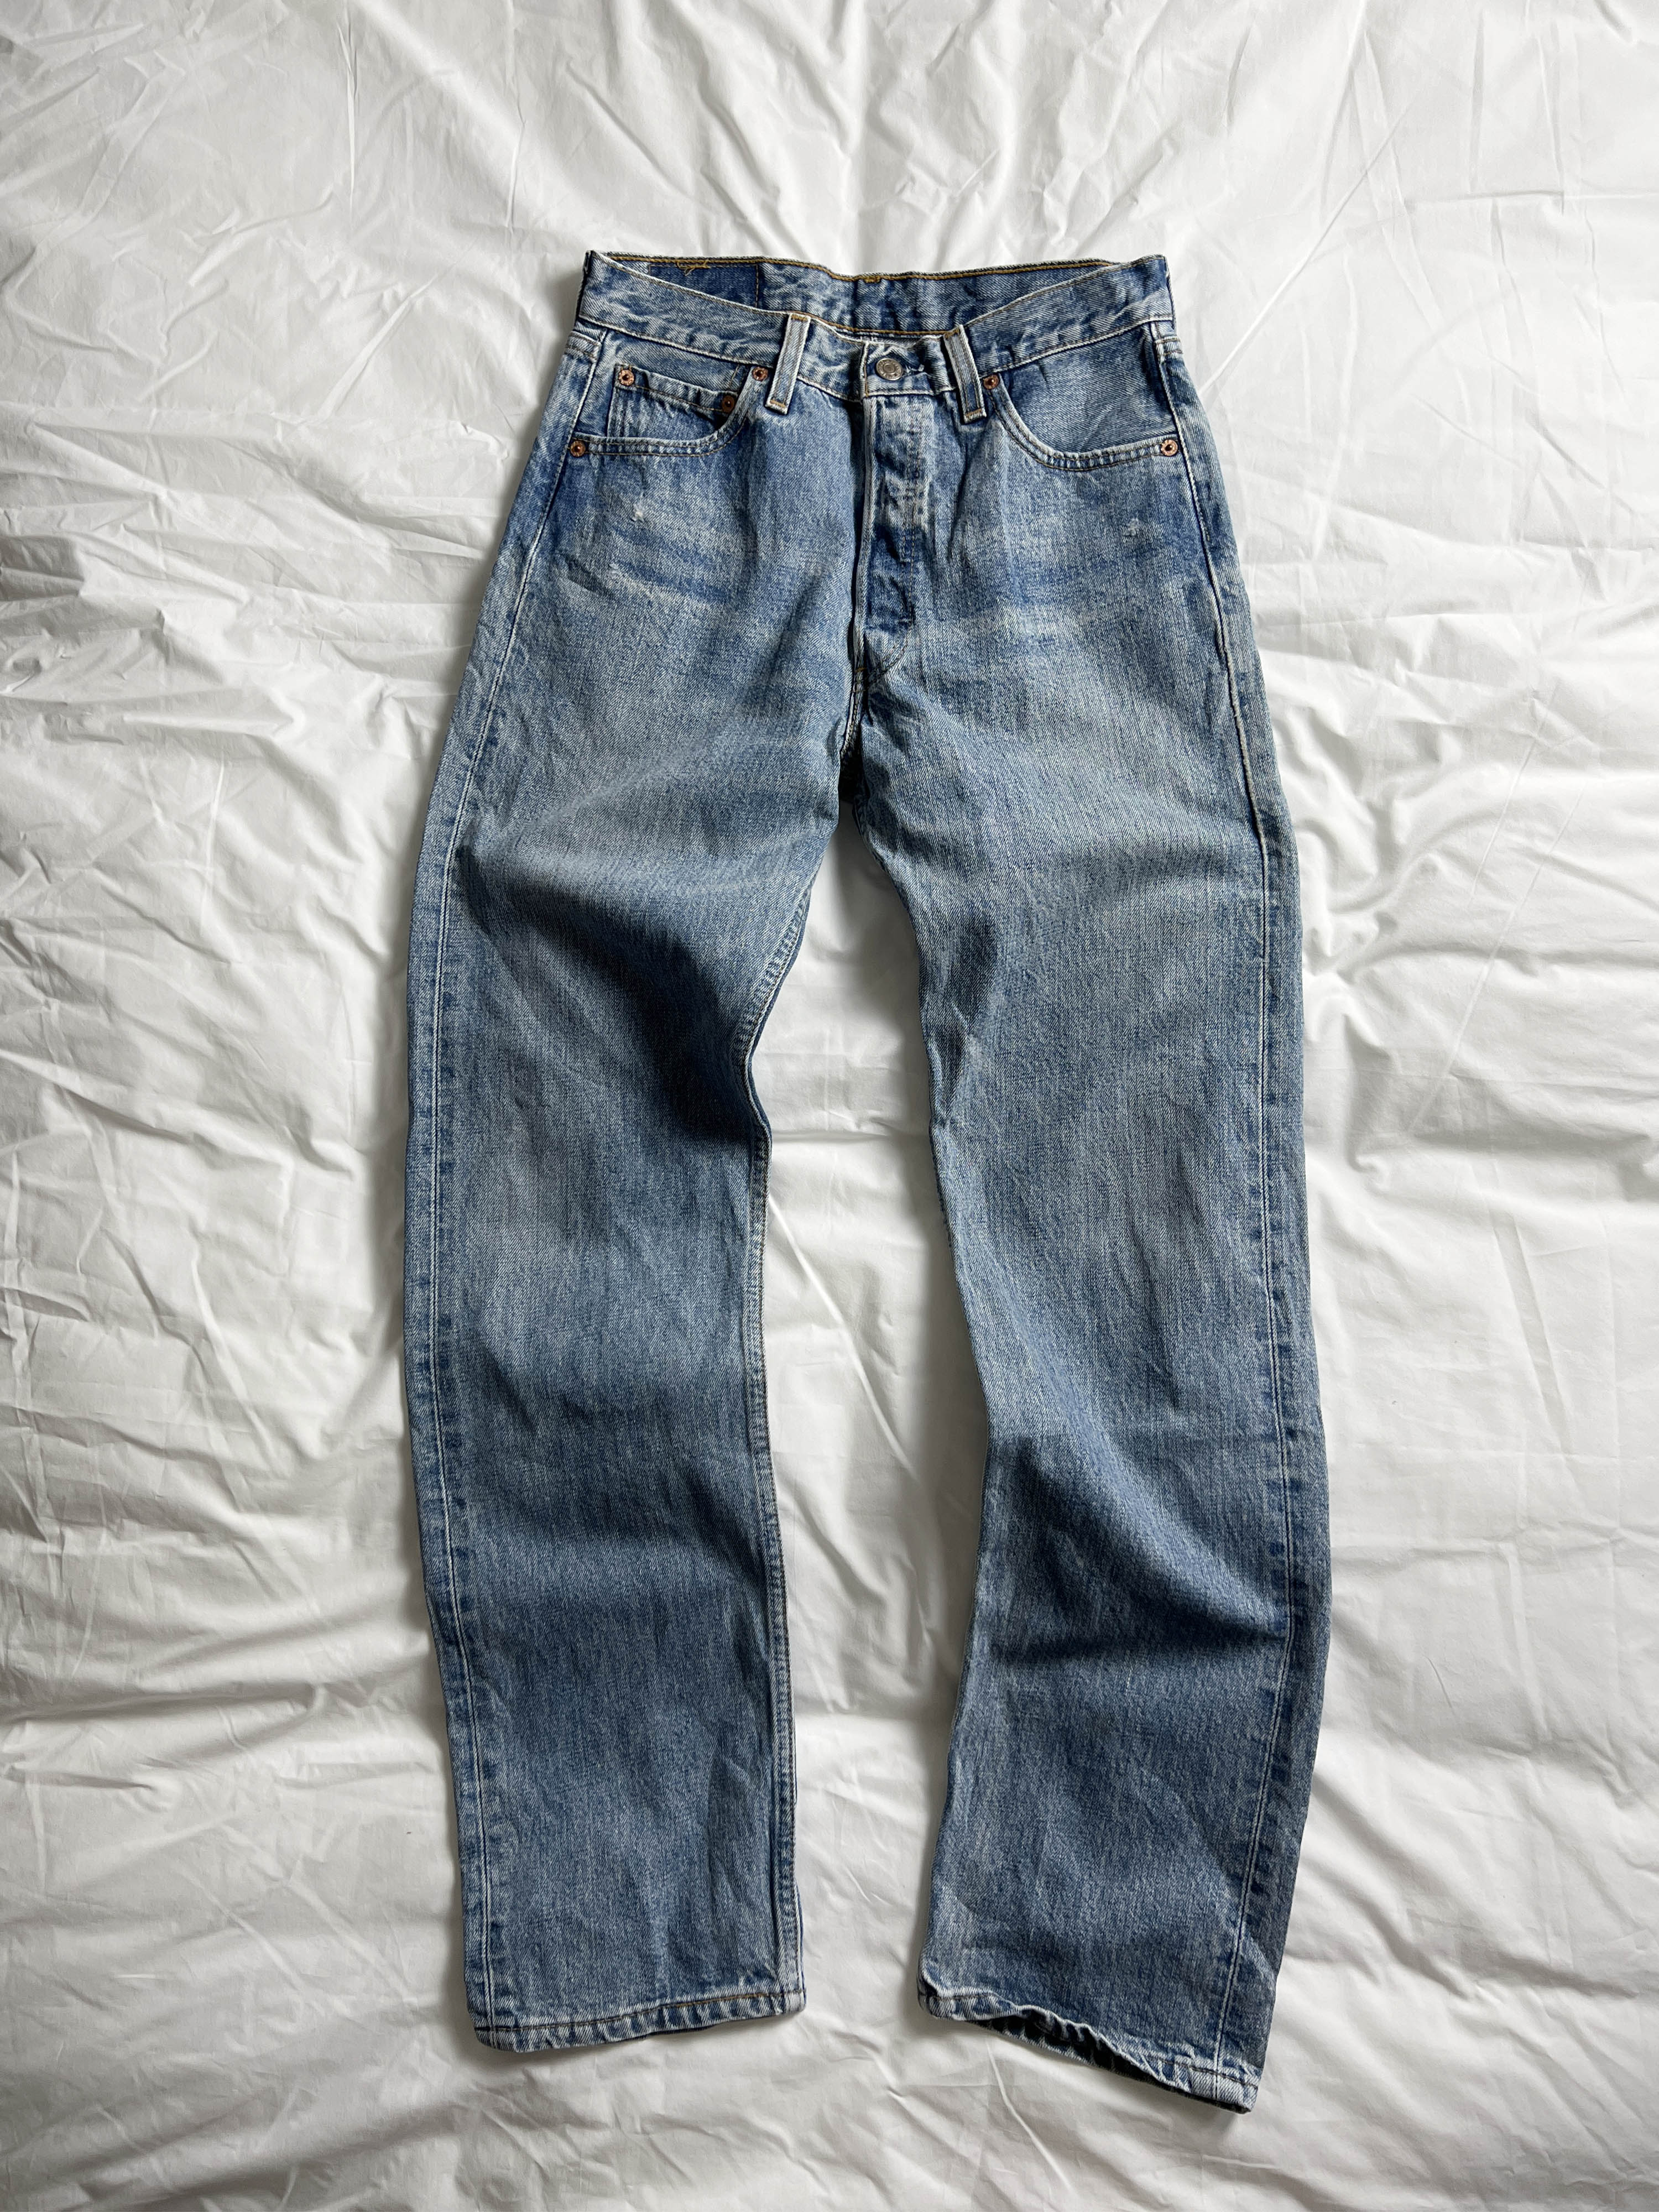 90s Levis 501 ( made in USA )